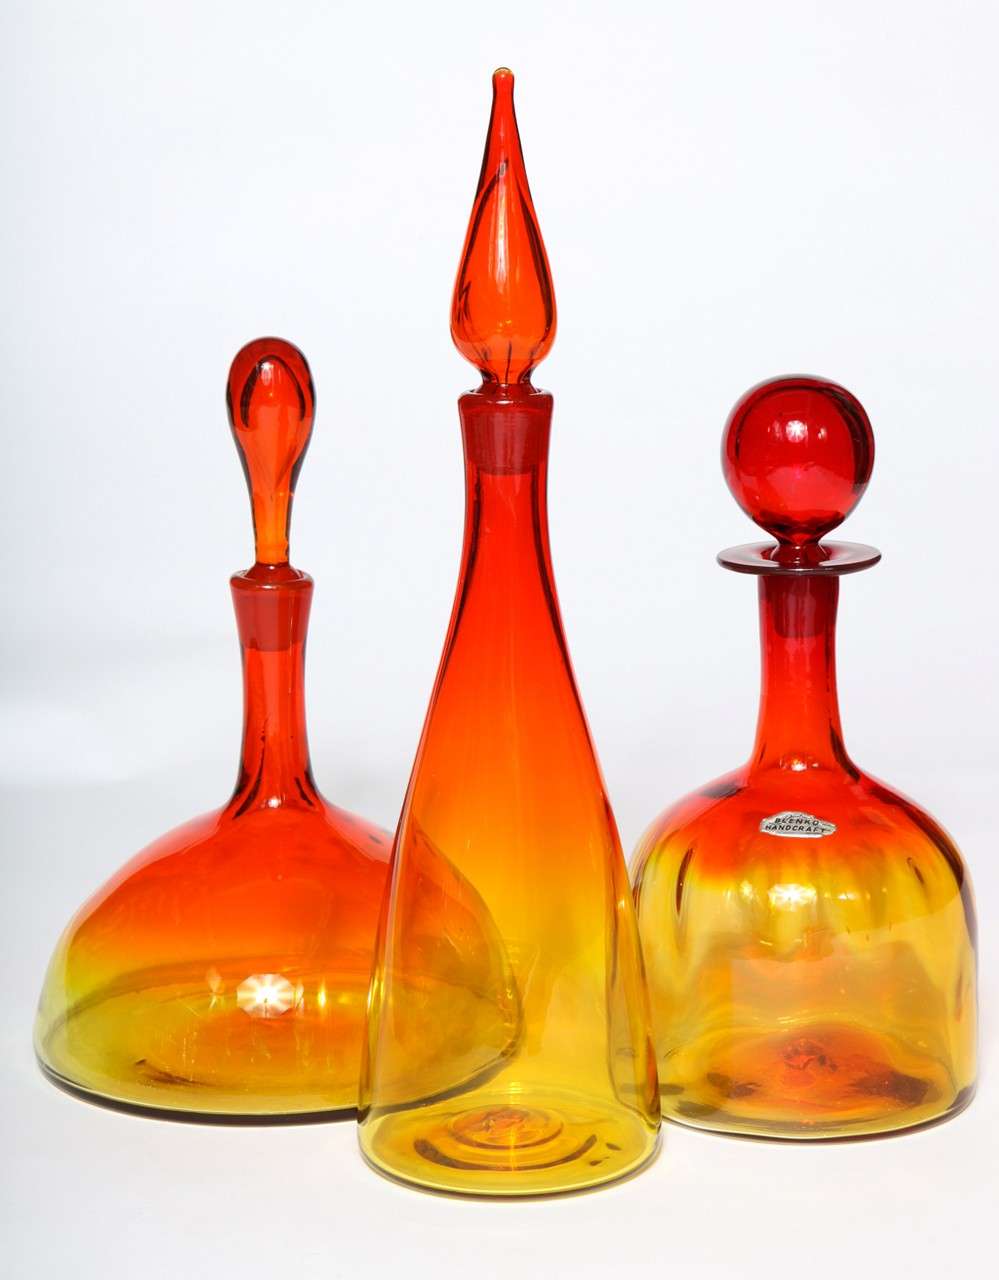 A dramatic and colorful trio of Blenko glass decanters. Striking tangerine color. Can be purchased individually.

Left to Right:
13